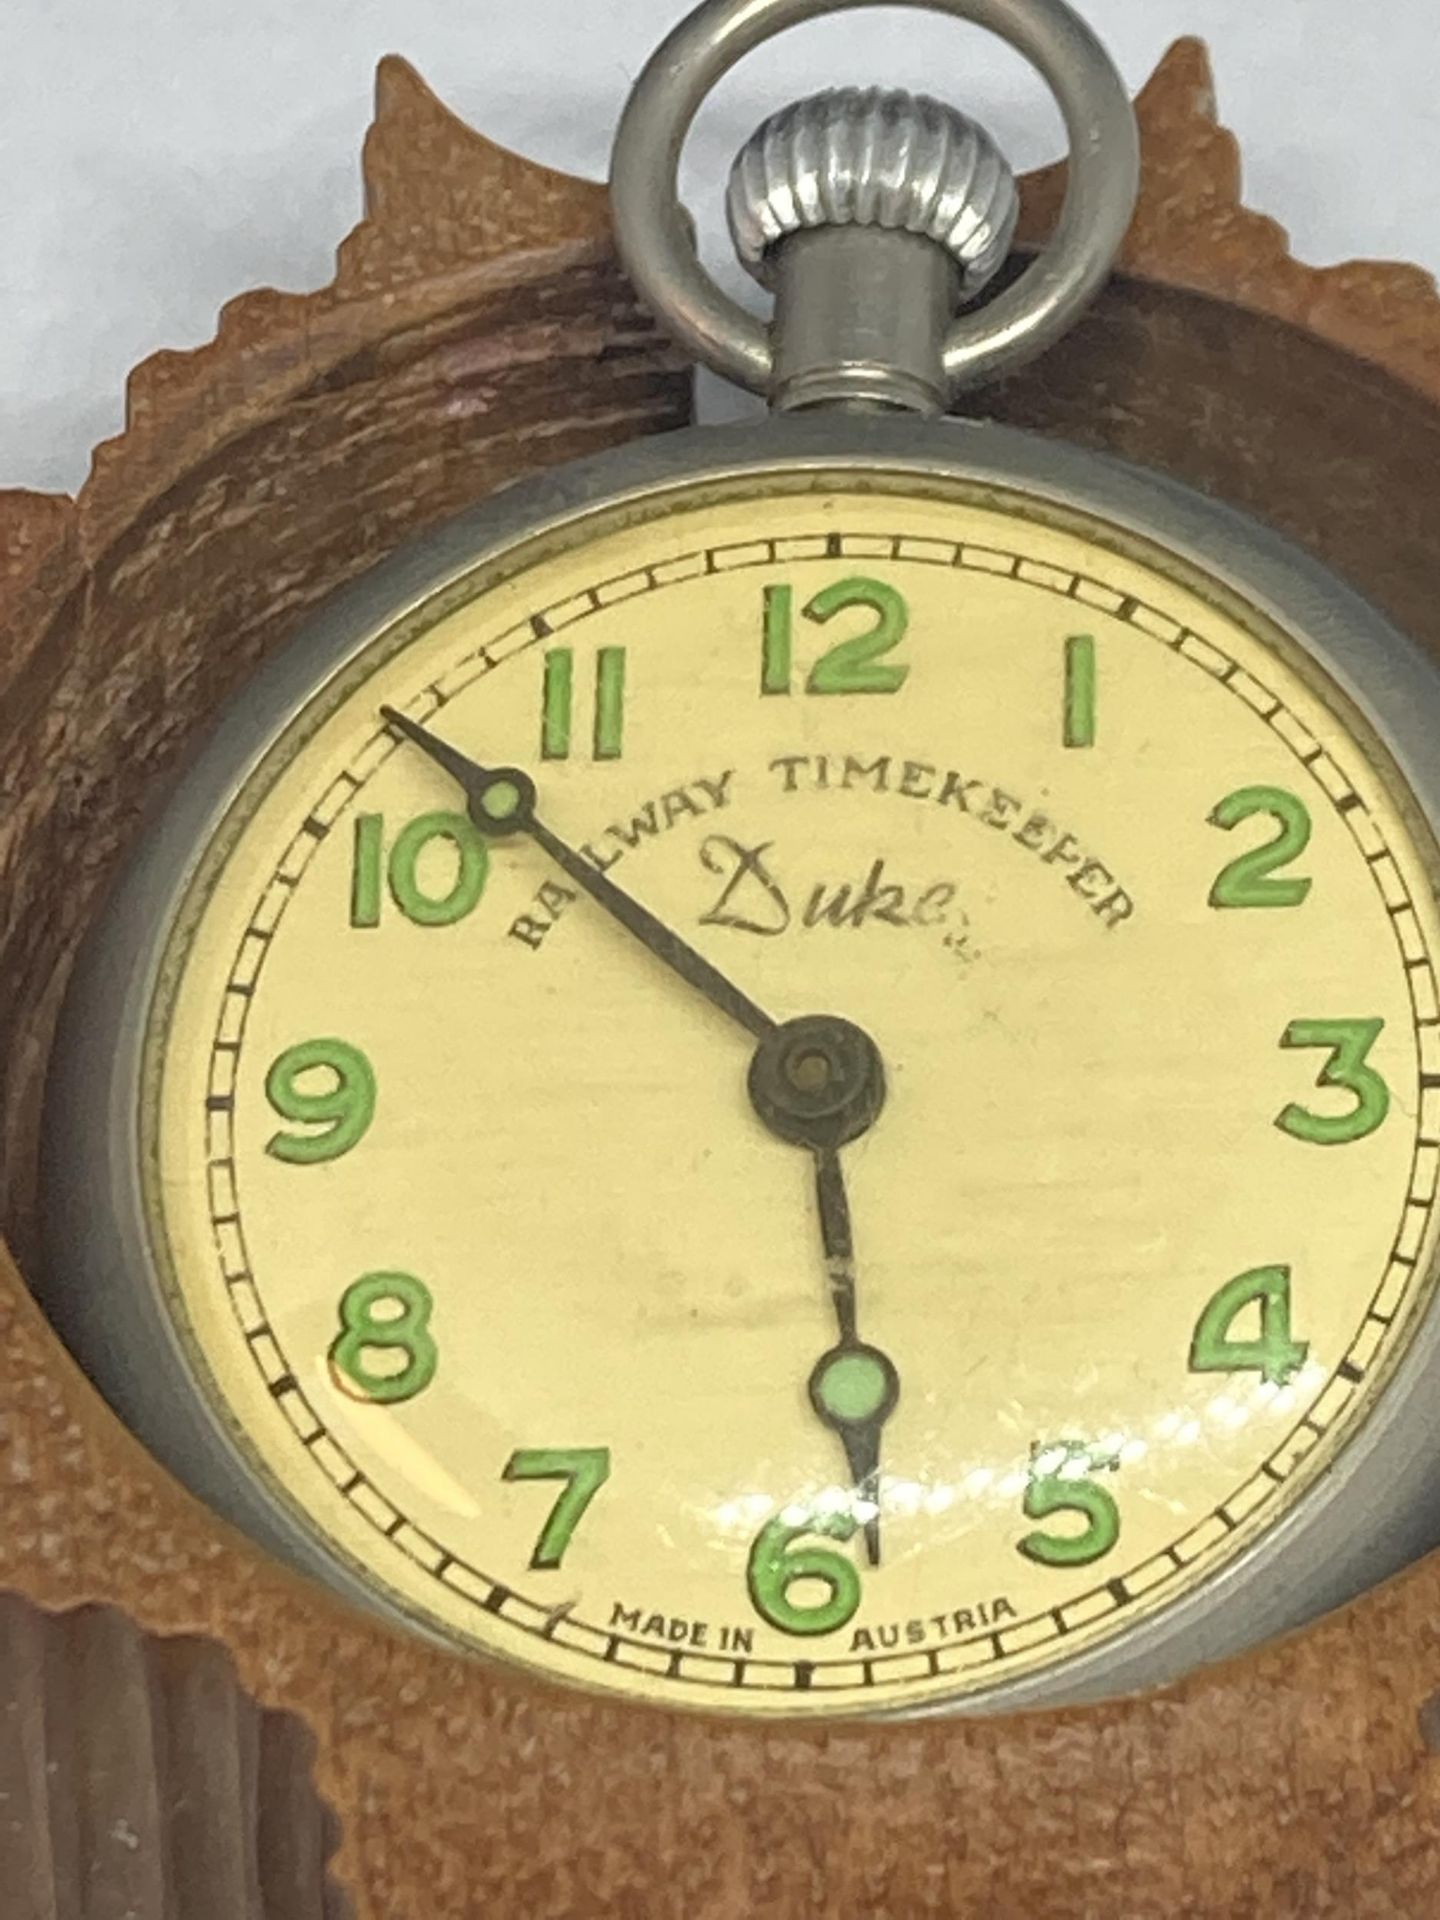 A RAILWAY TIMEKEEPER DUKE POCKET WATCH IN A CARVED WOODEN CASE - Image 2 of 4